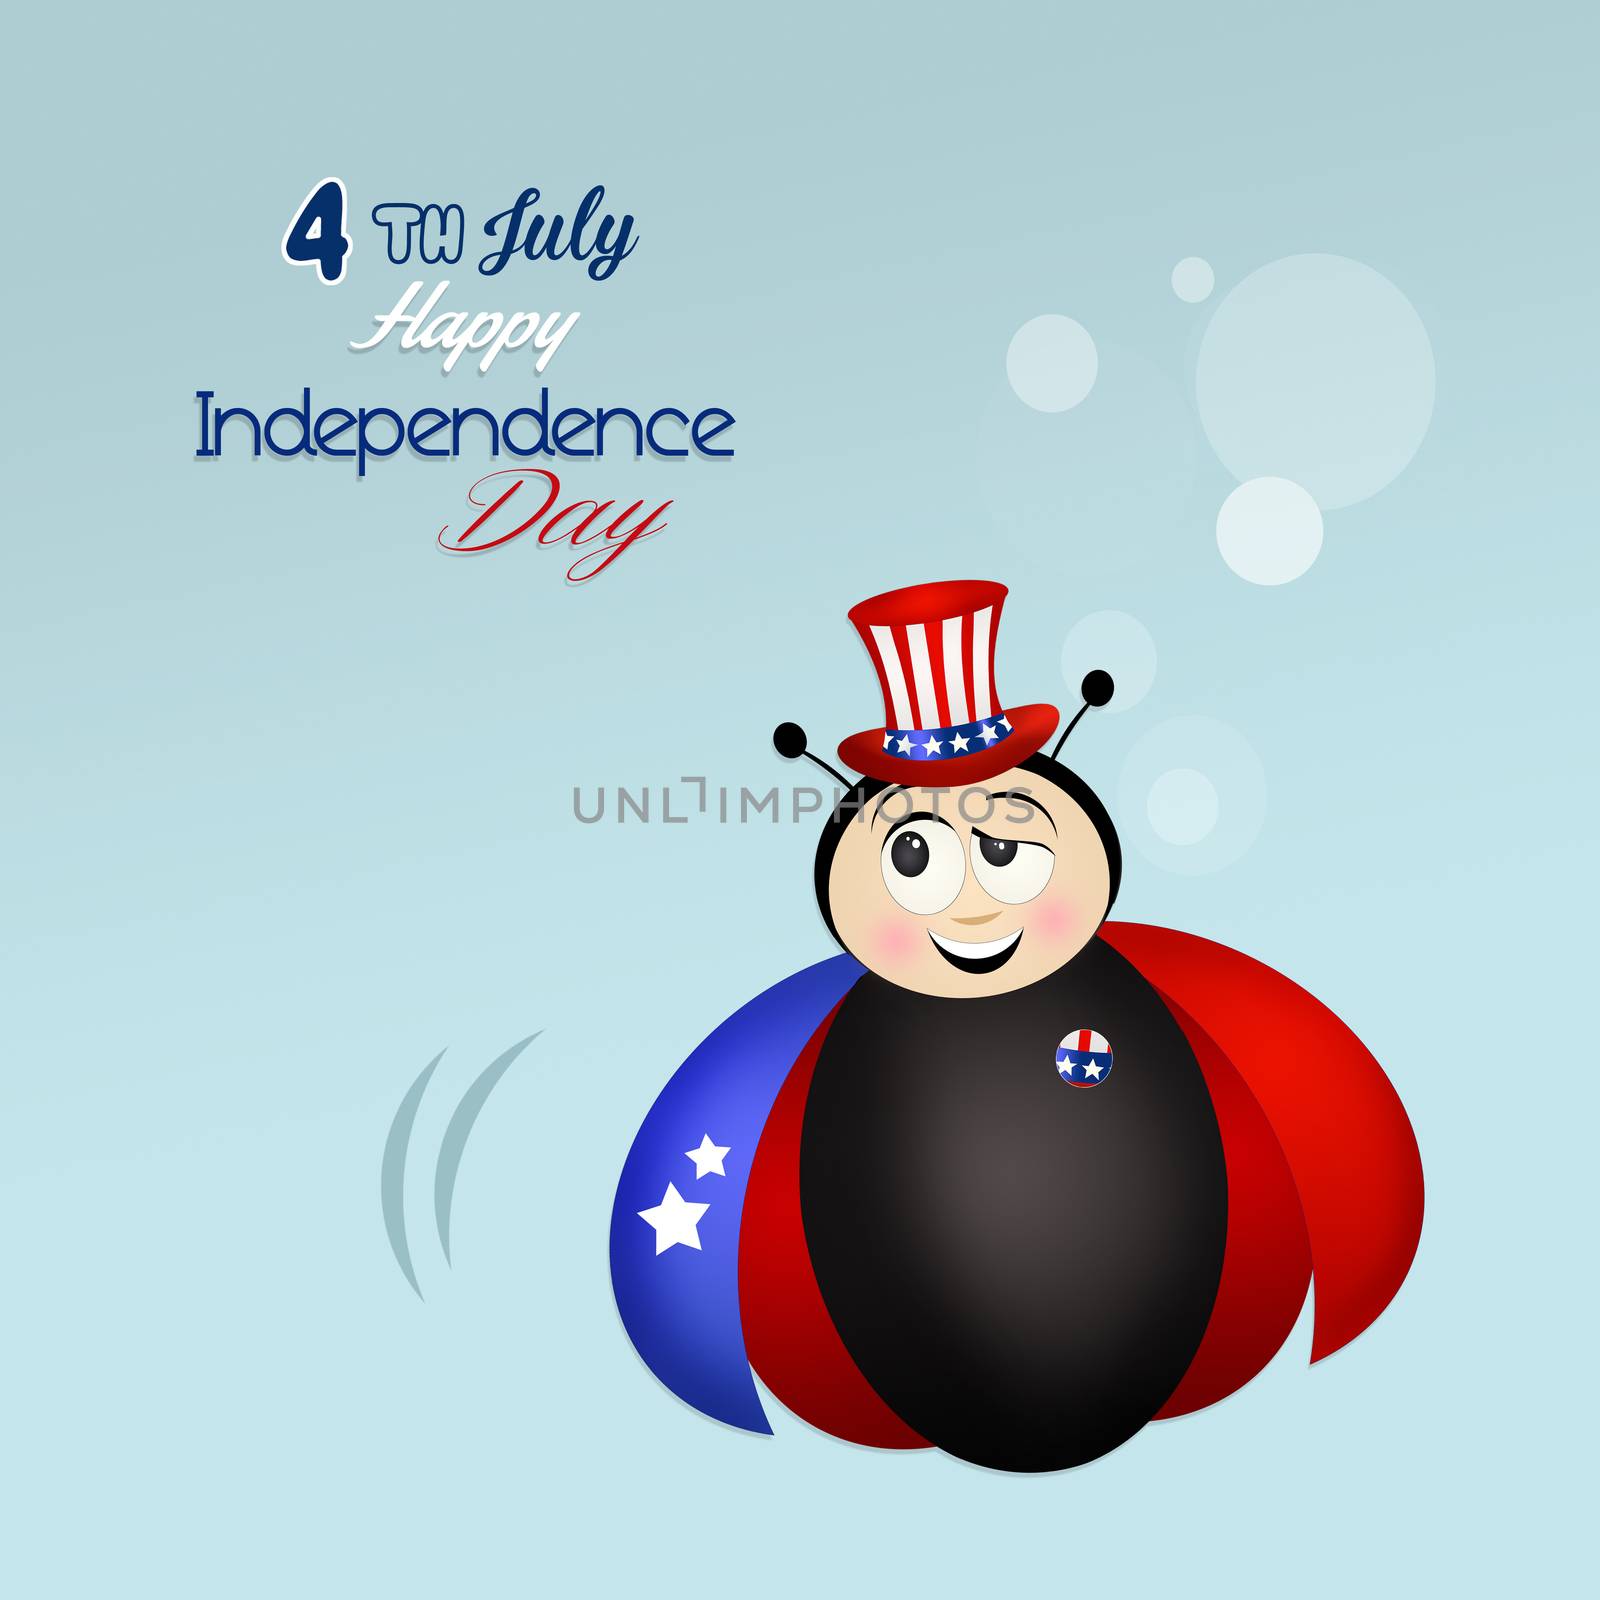 Independence Day, 4th of July by adrenalina